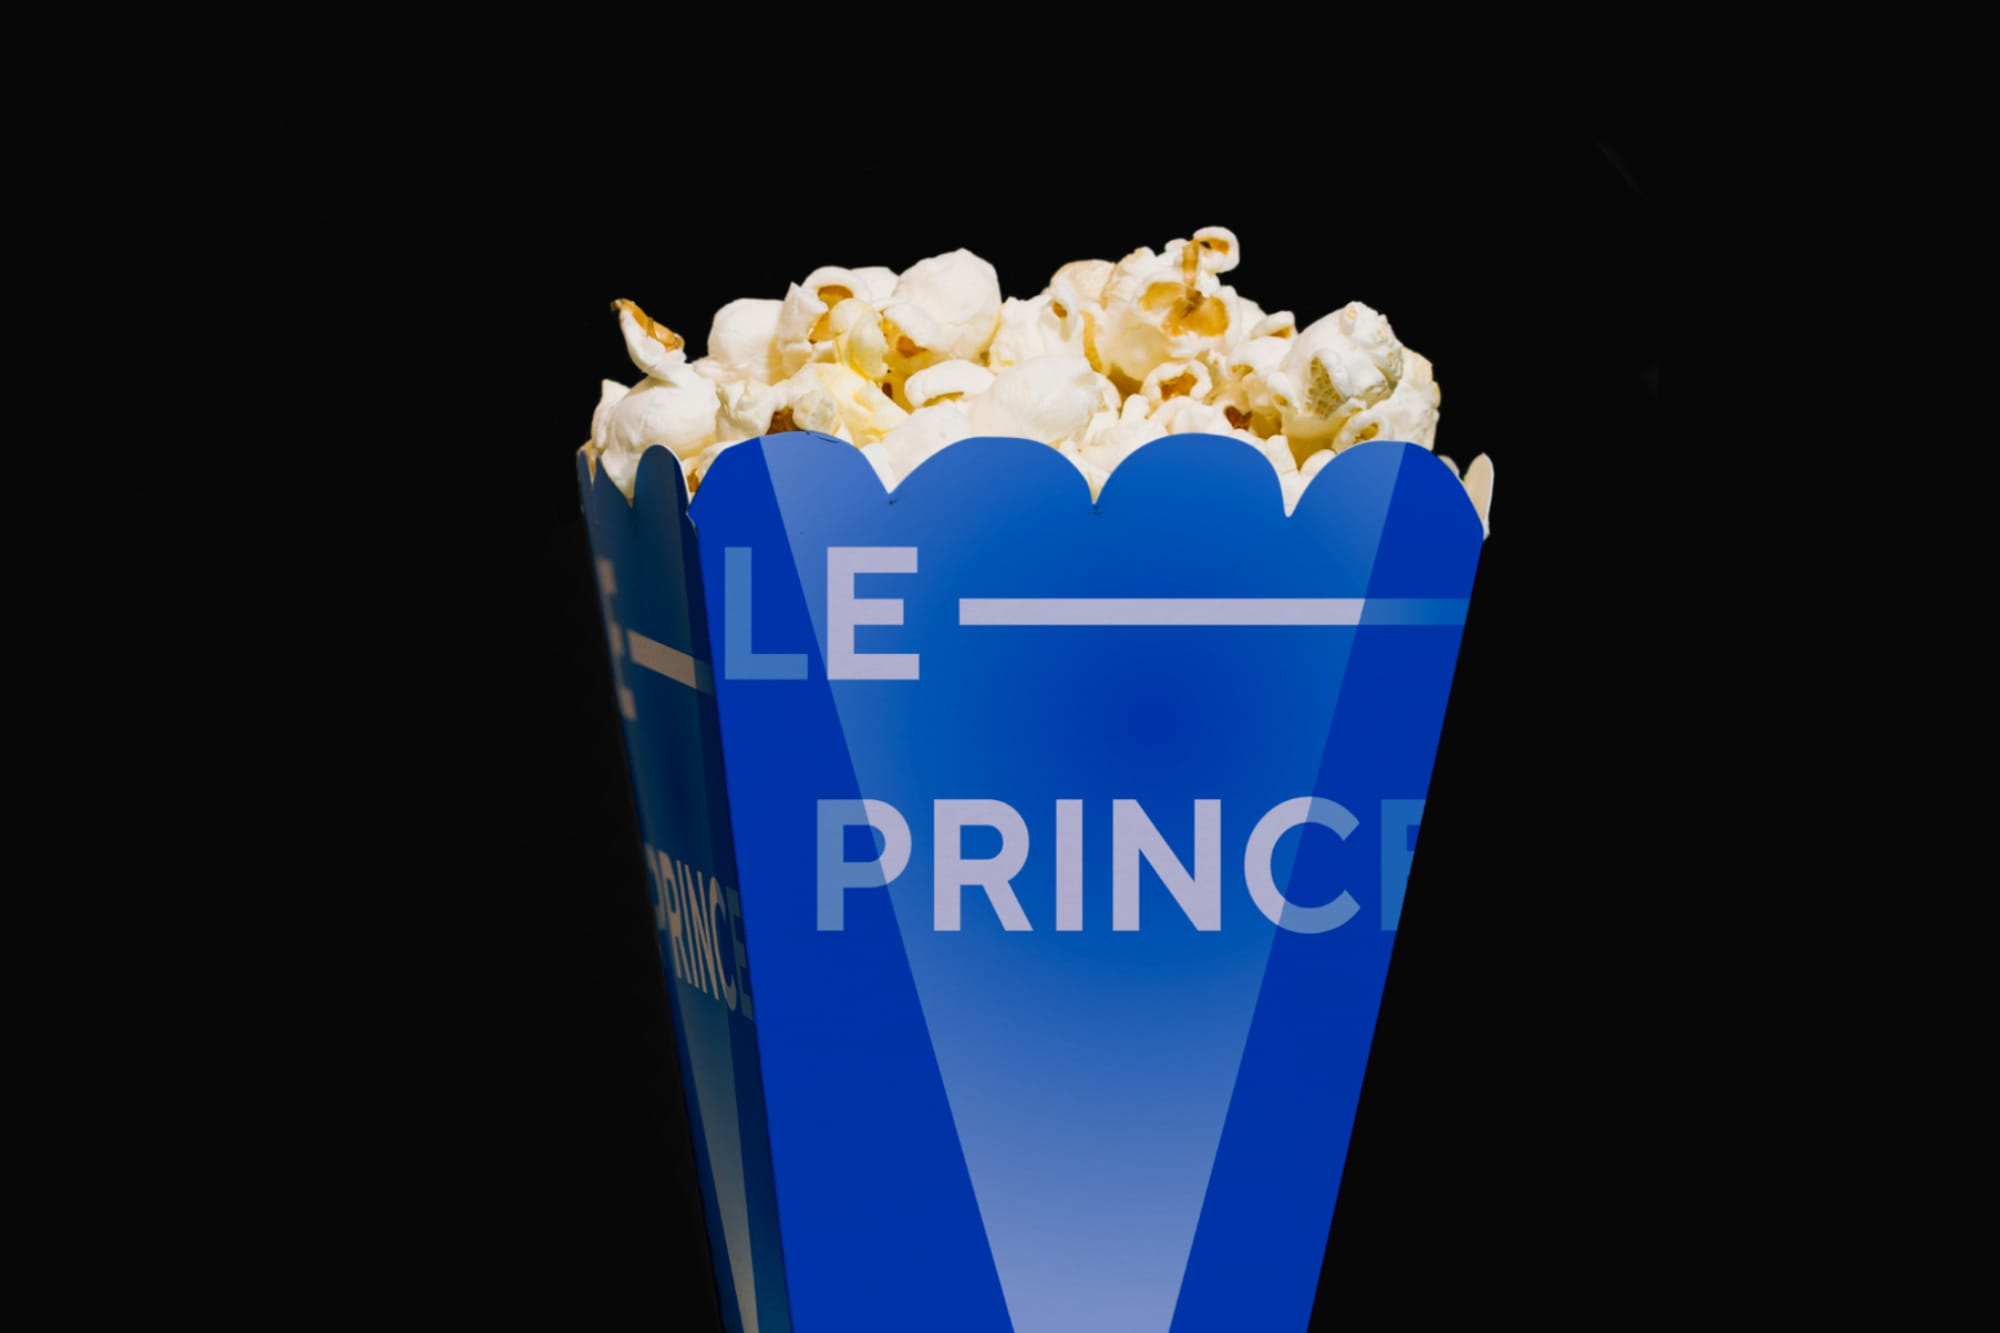 Leprince Cinecontroller: Positioning and Brand Identity